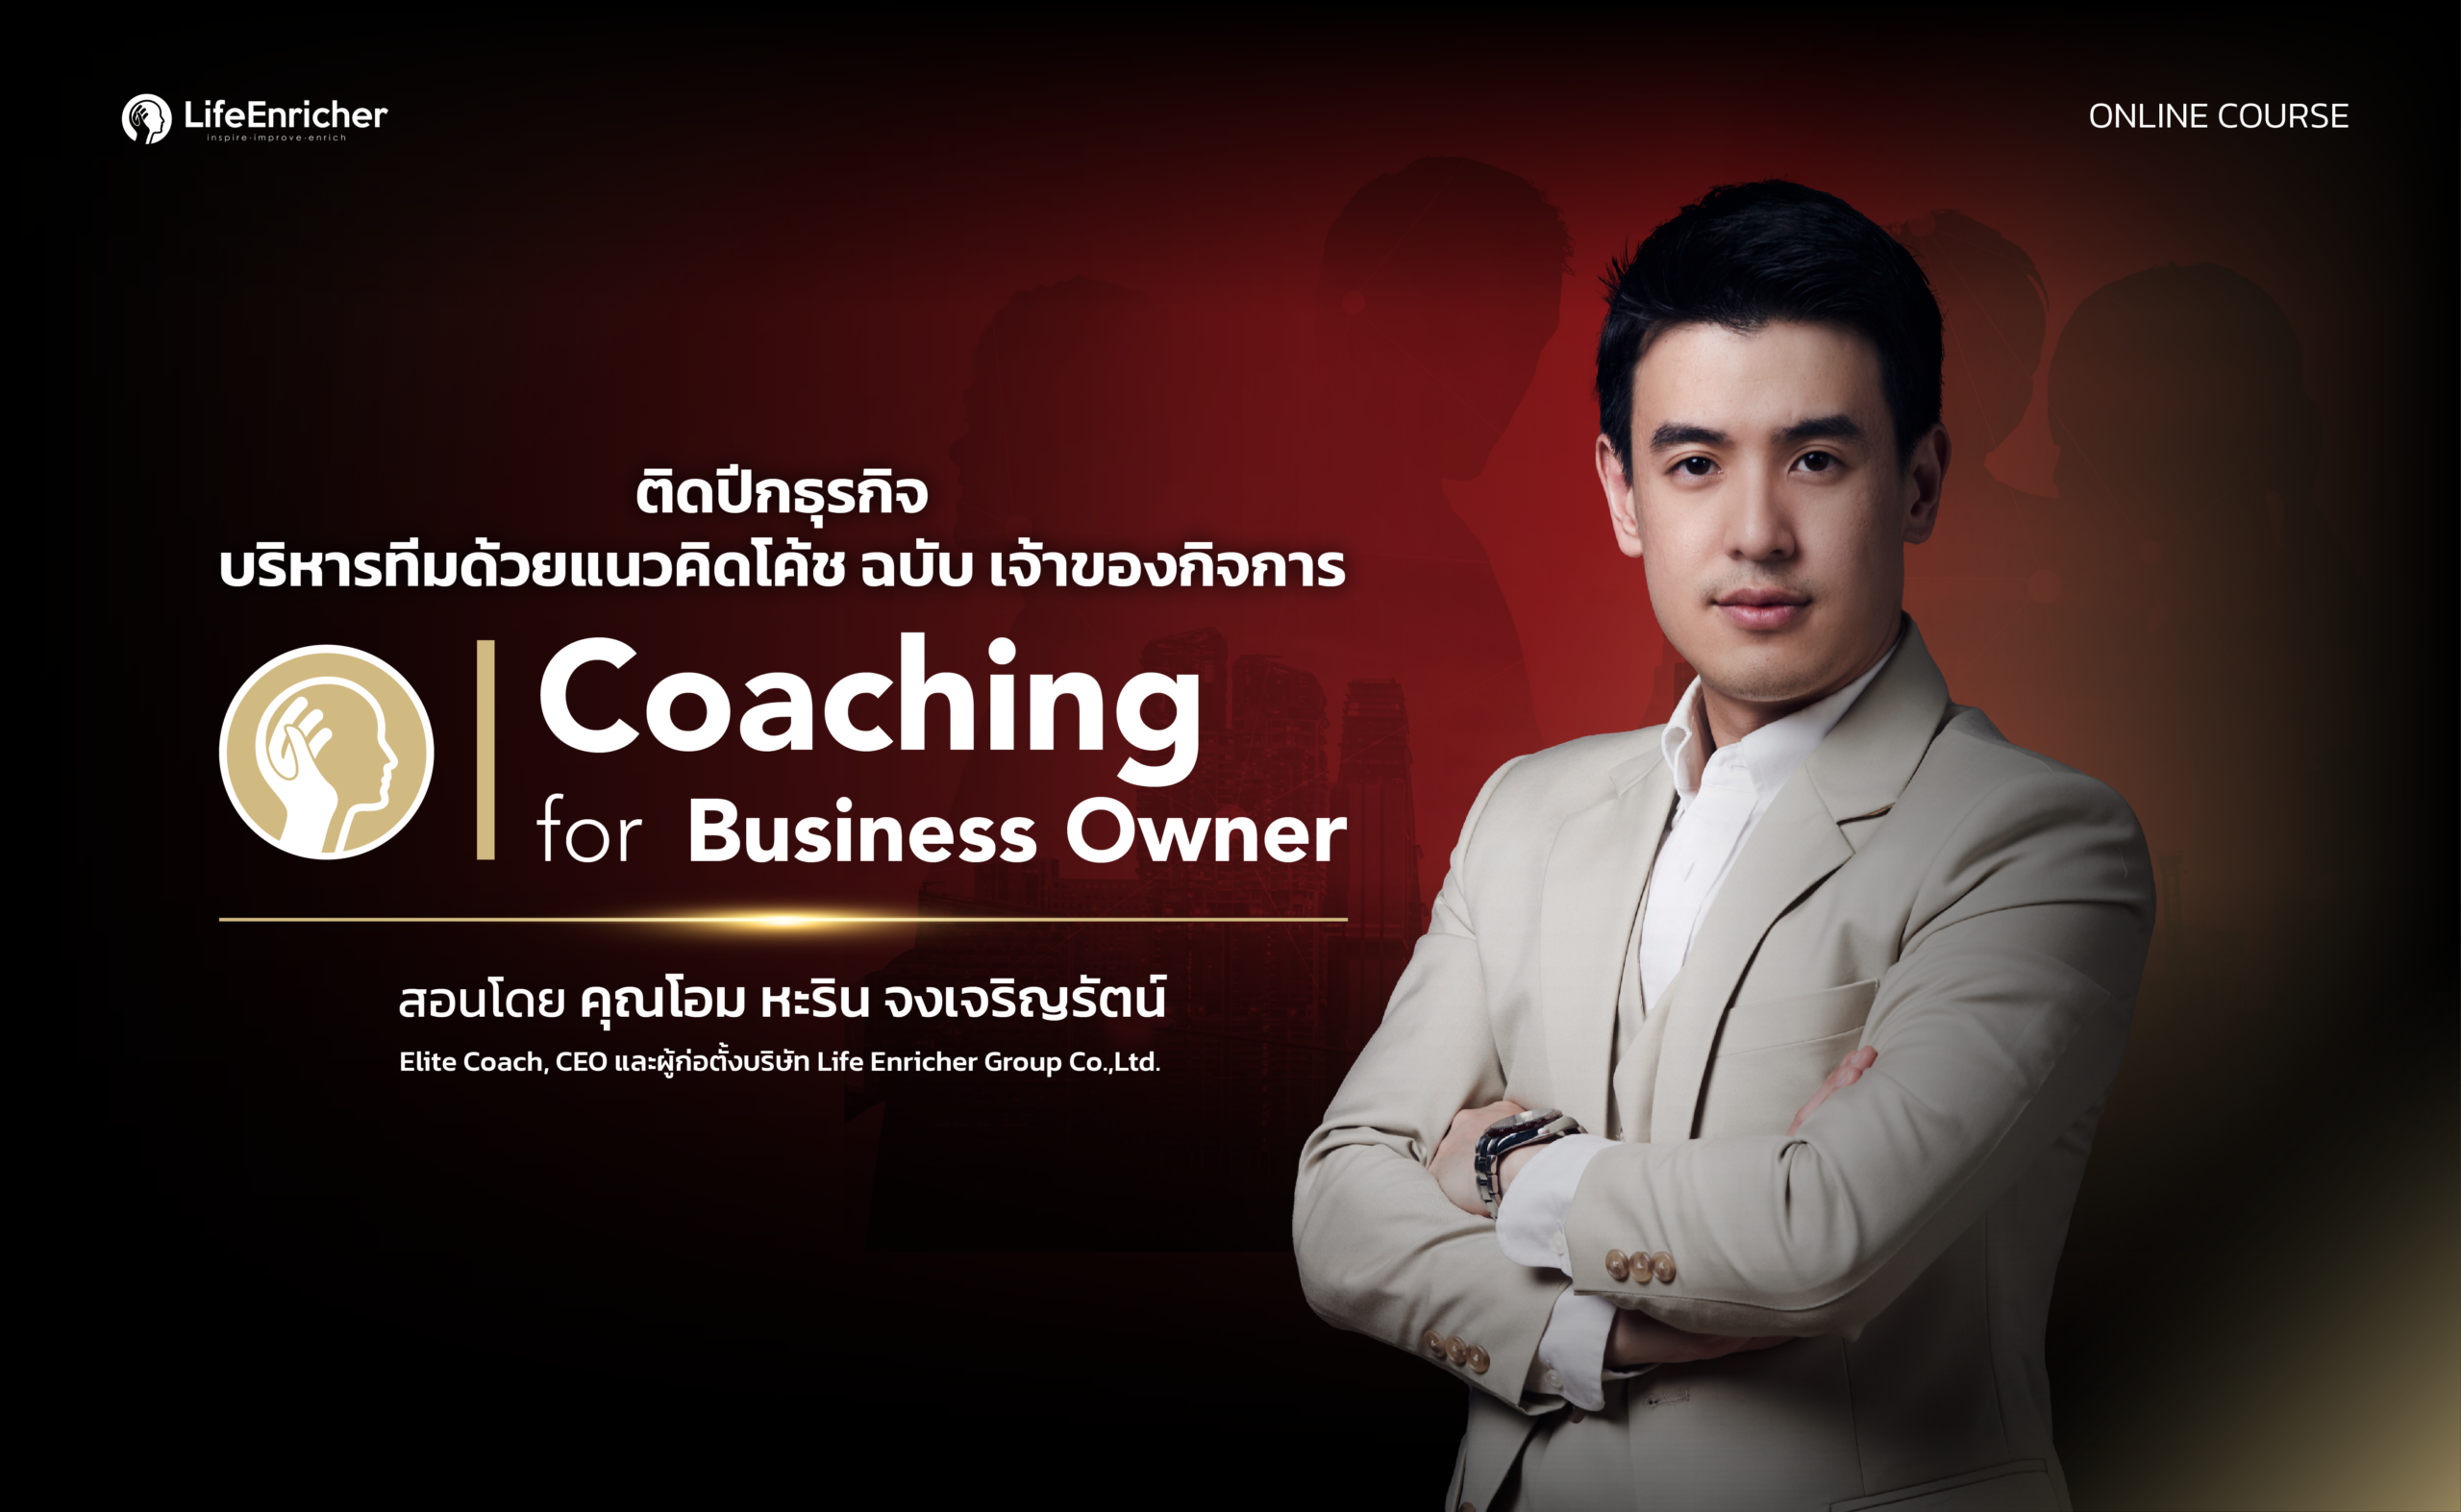 Coaching for Business Owner